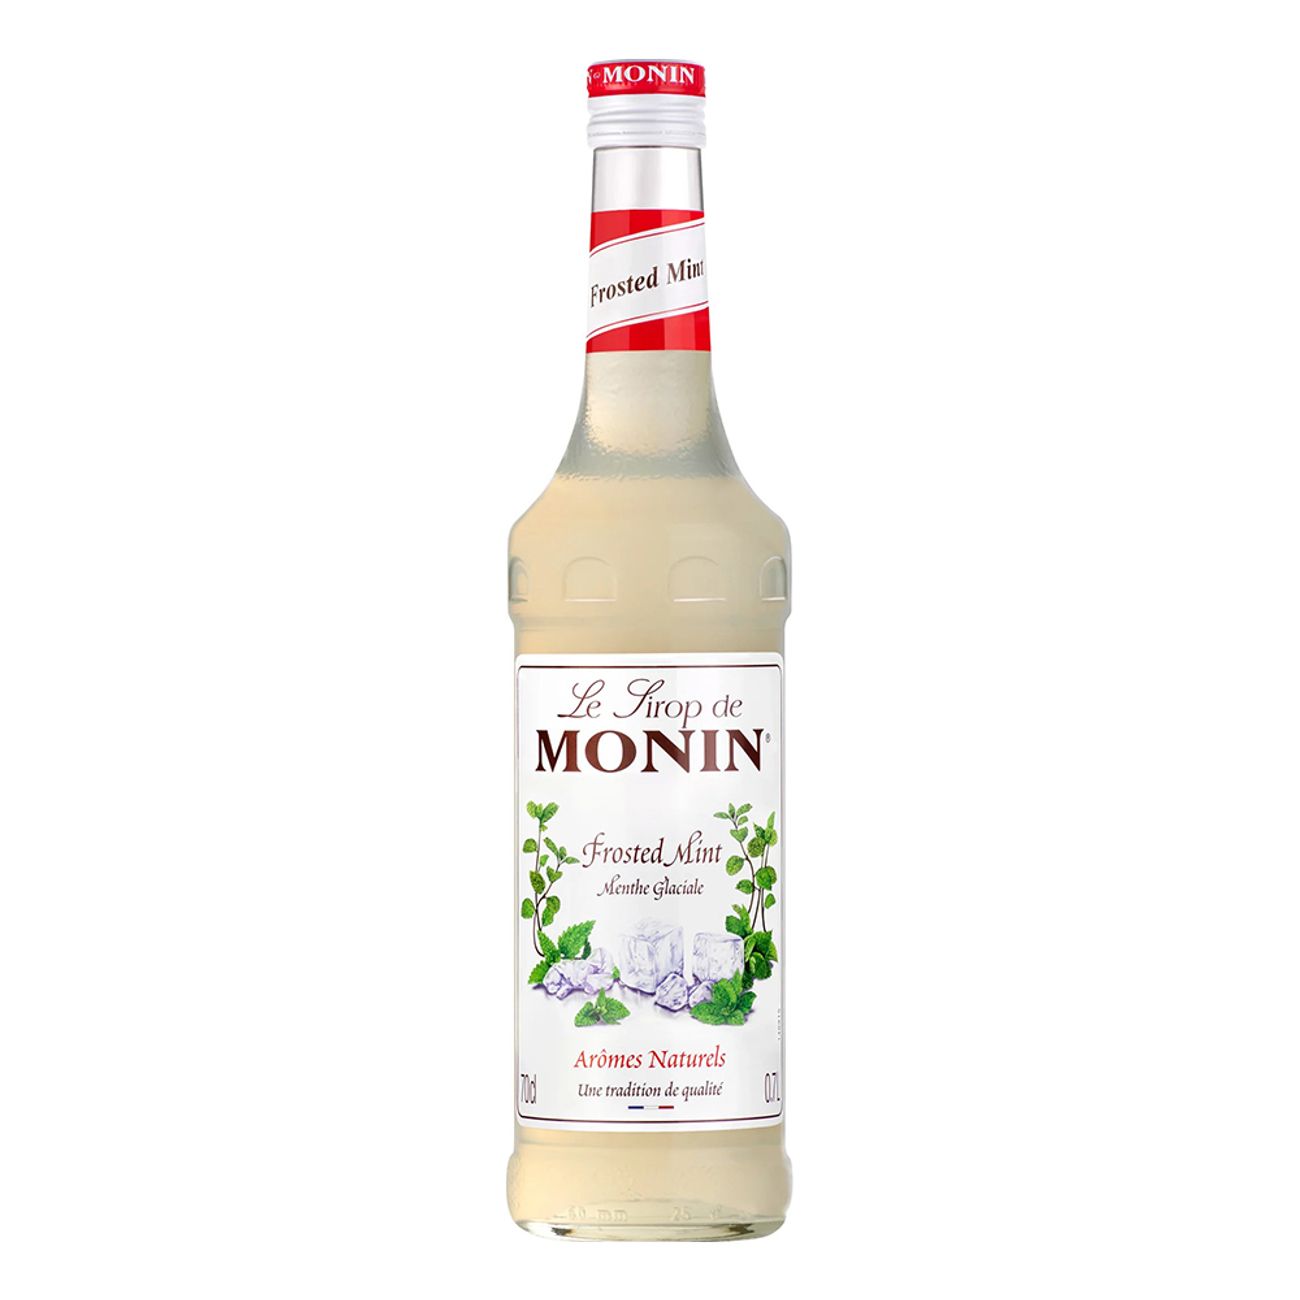 monin-frosted-mint-syrup-102008-1